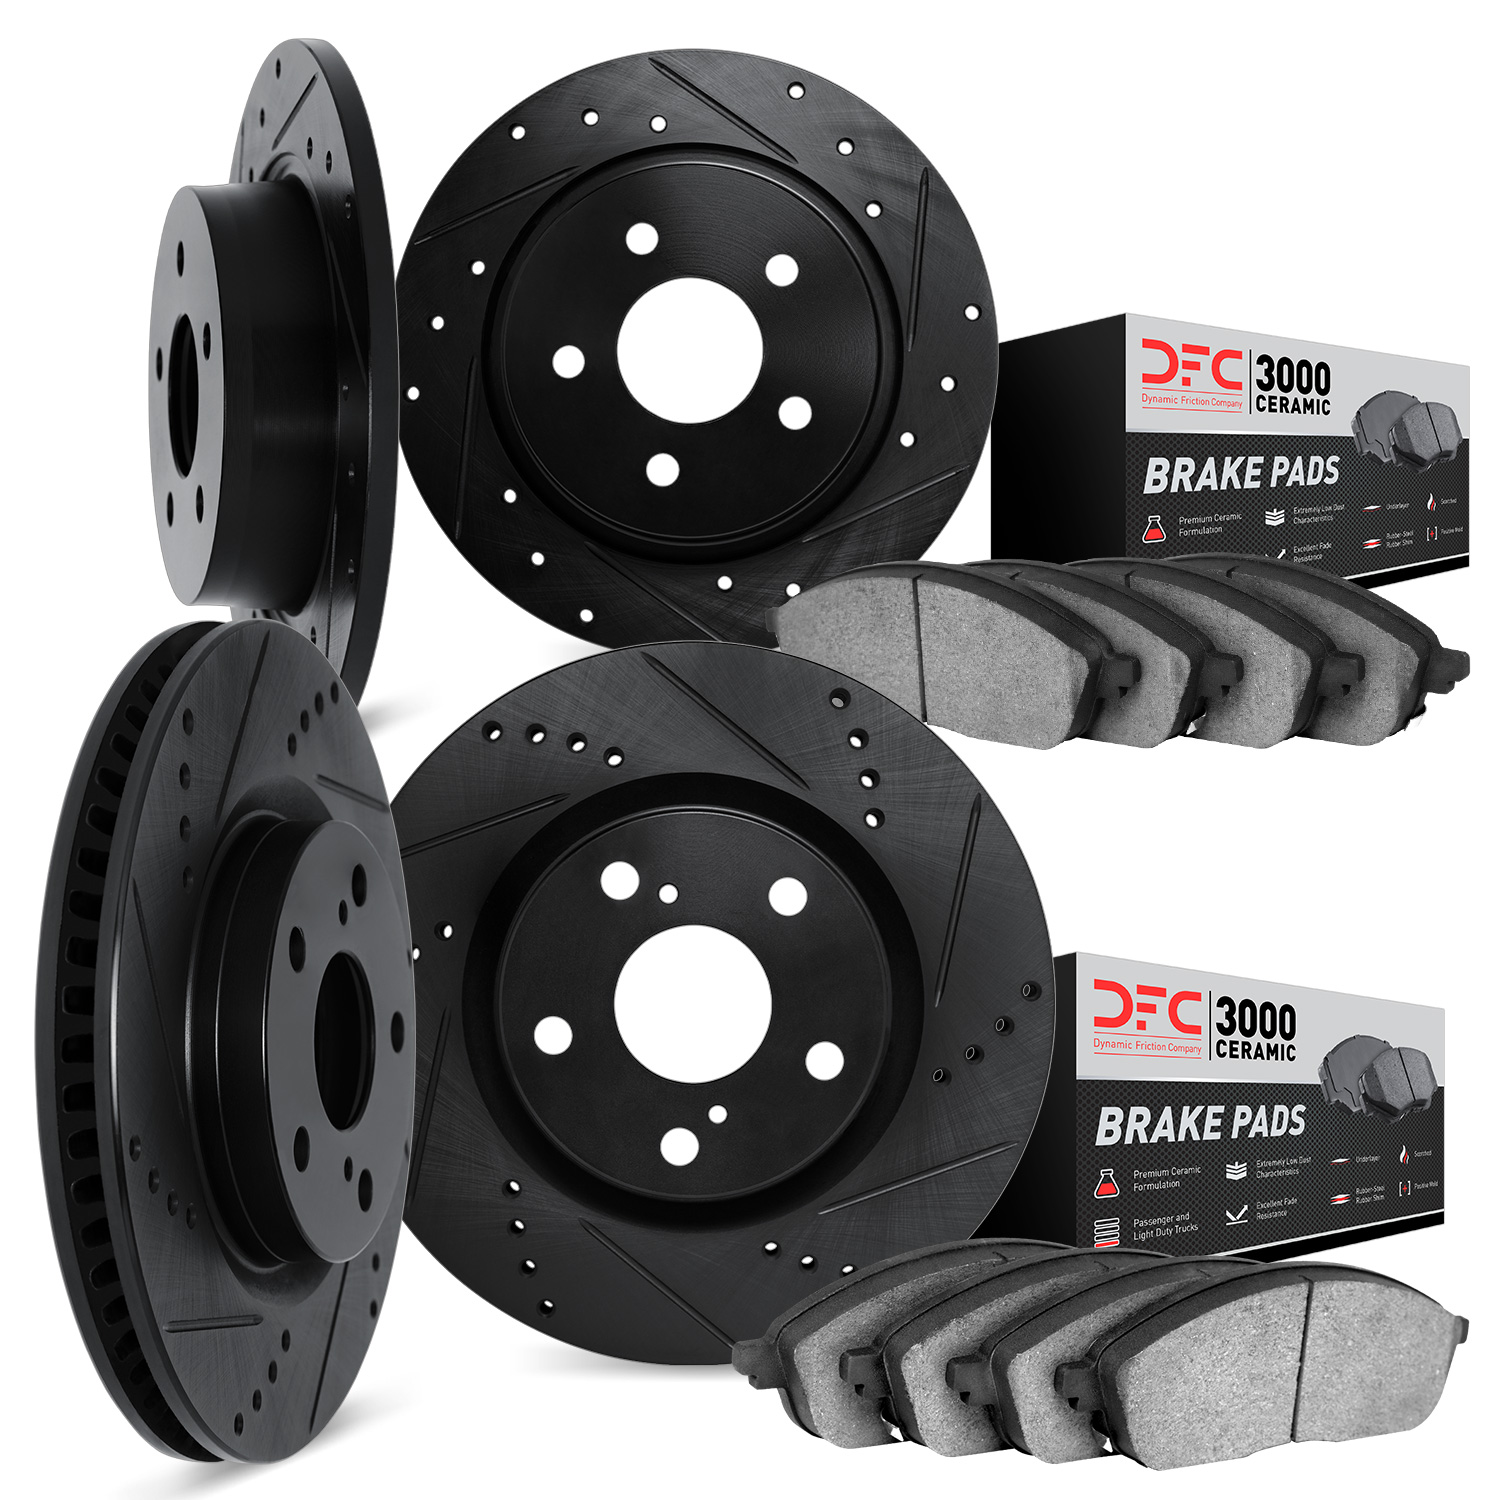 8304-59043 Drilled/Slotted Brake Rotors with 3000-Series Ceramic Brake Pads Kit [Black], 2012-2015 Acura/Honda, Position: Front